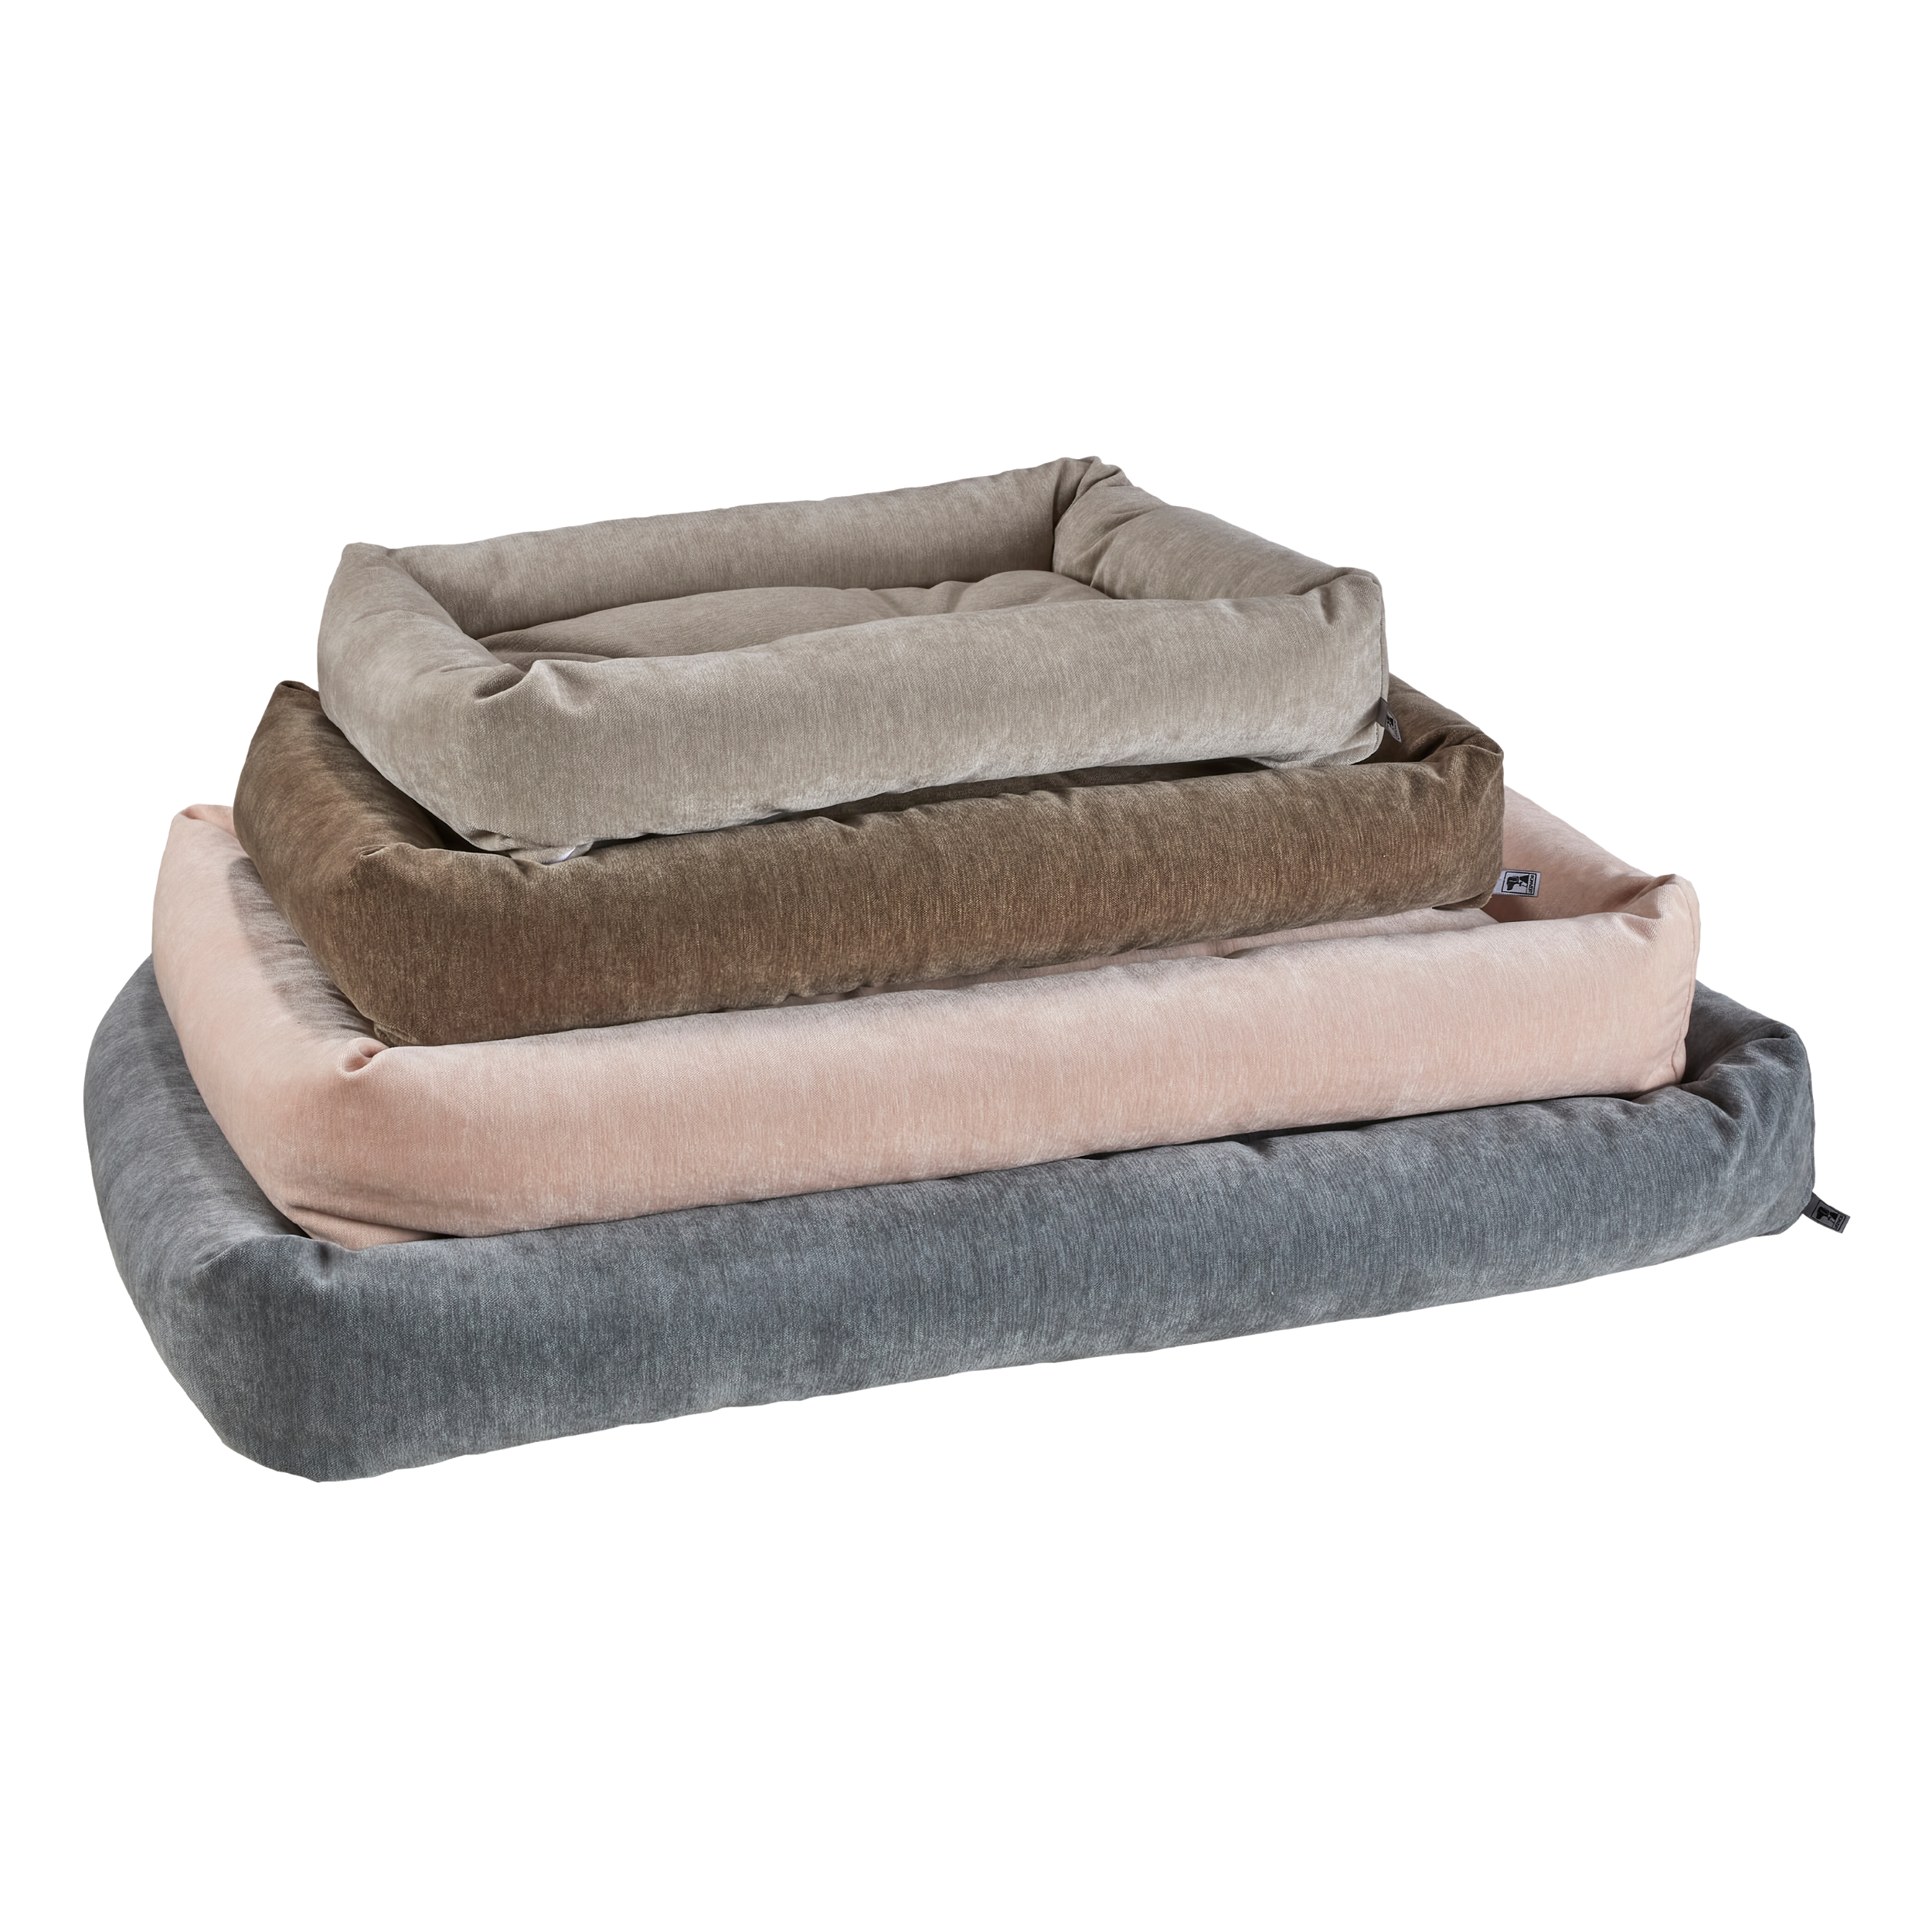 MINERAL-TANGO-DOG-BED-KENNEL-CRATE-MAT